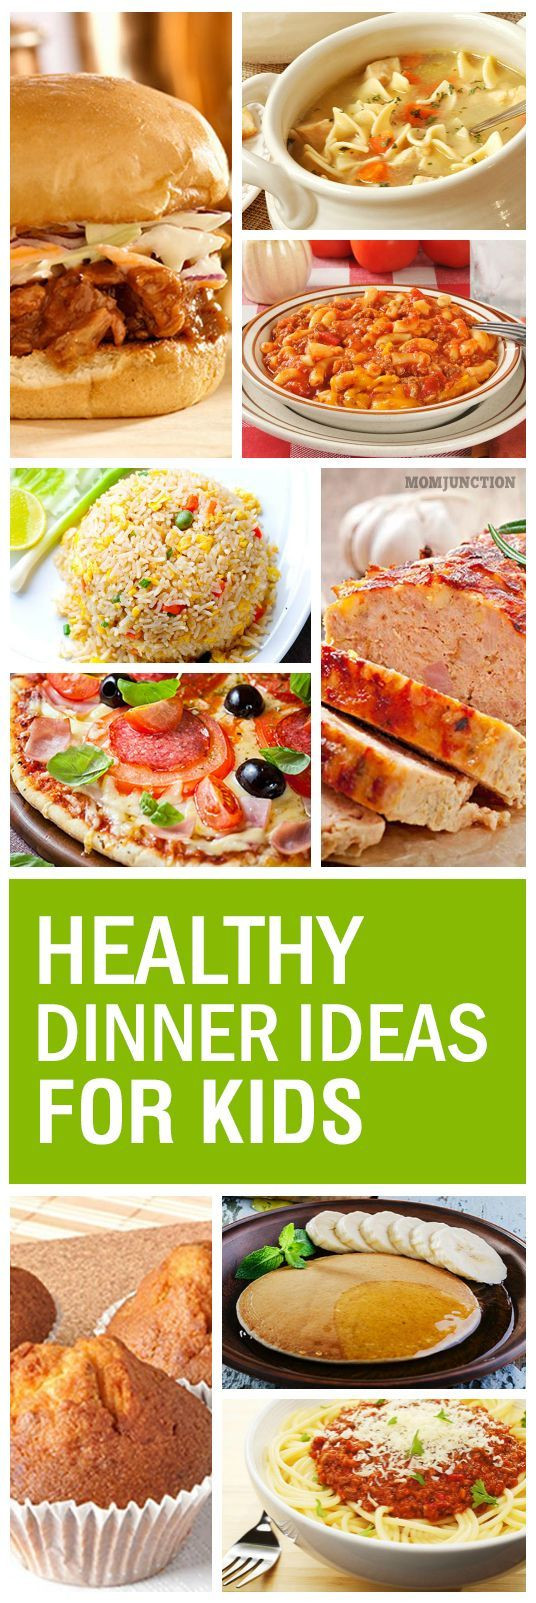 Easy Healthy Dinner Recipes For Kids
 15 Quick And Yummy Dinner Recipes For Kids